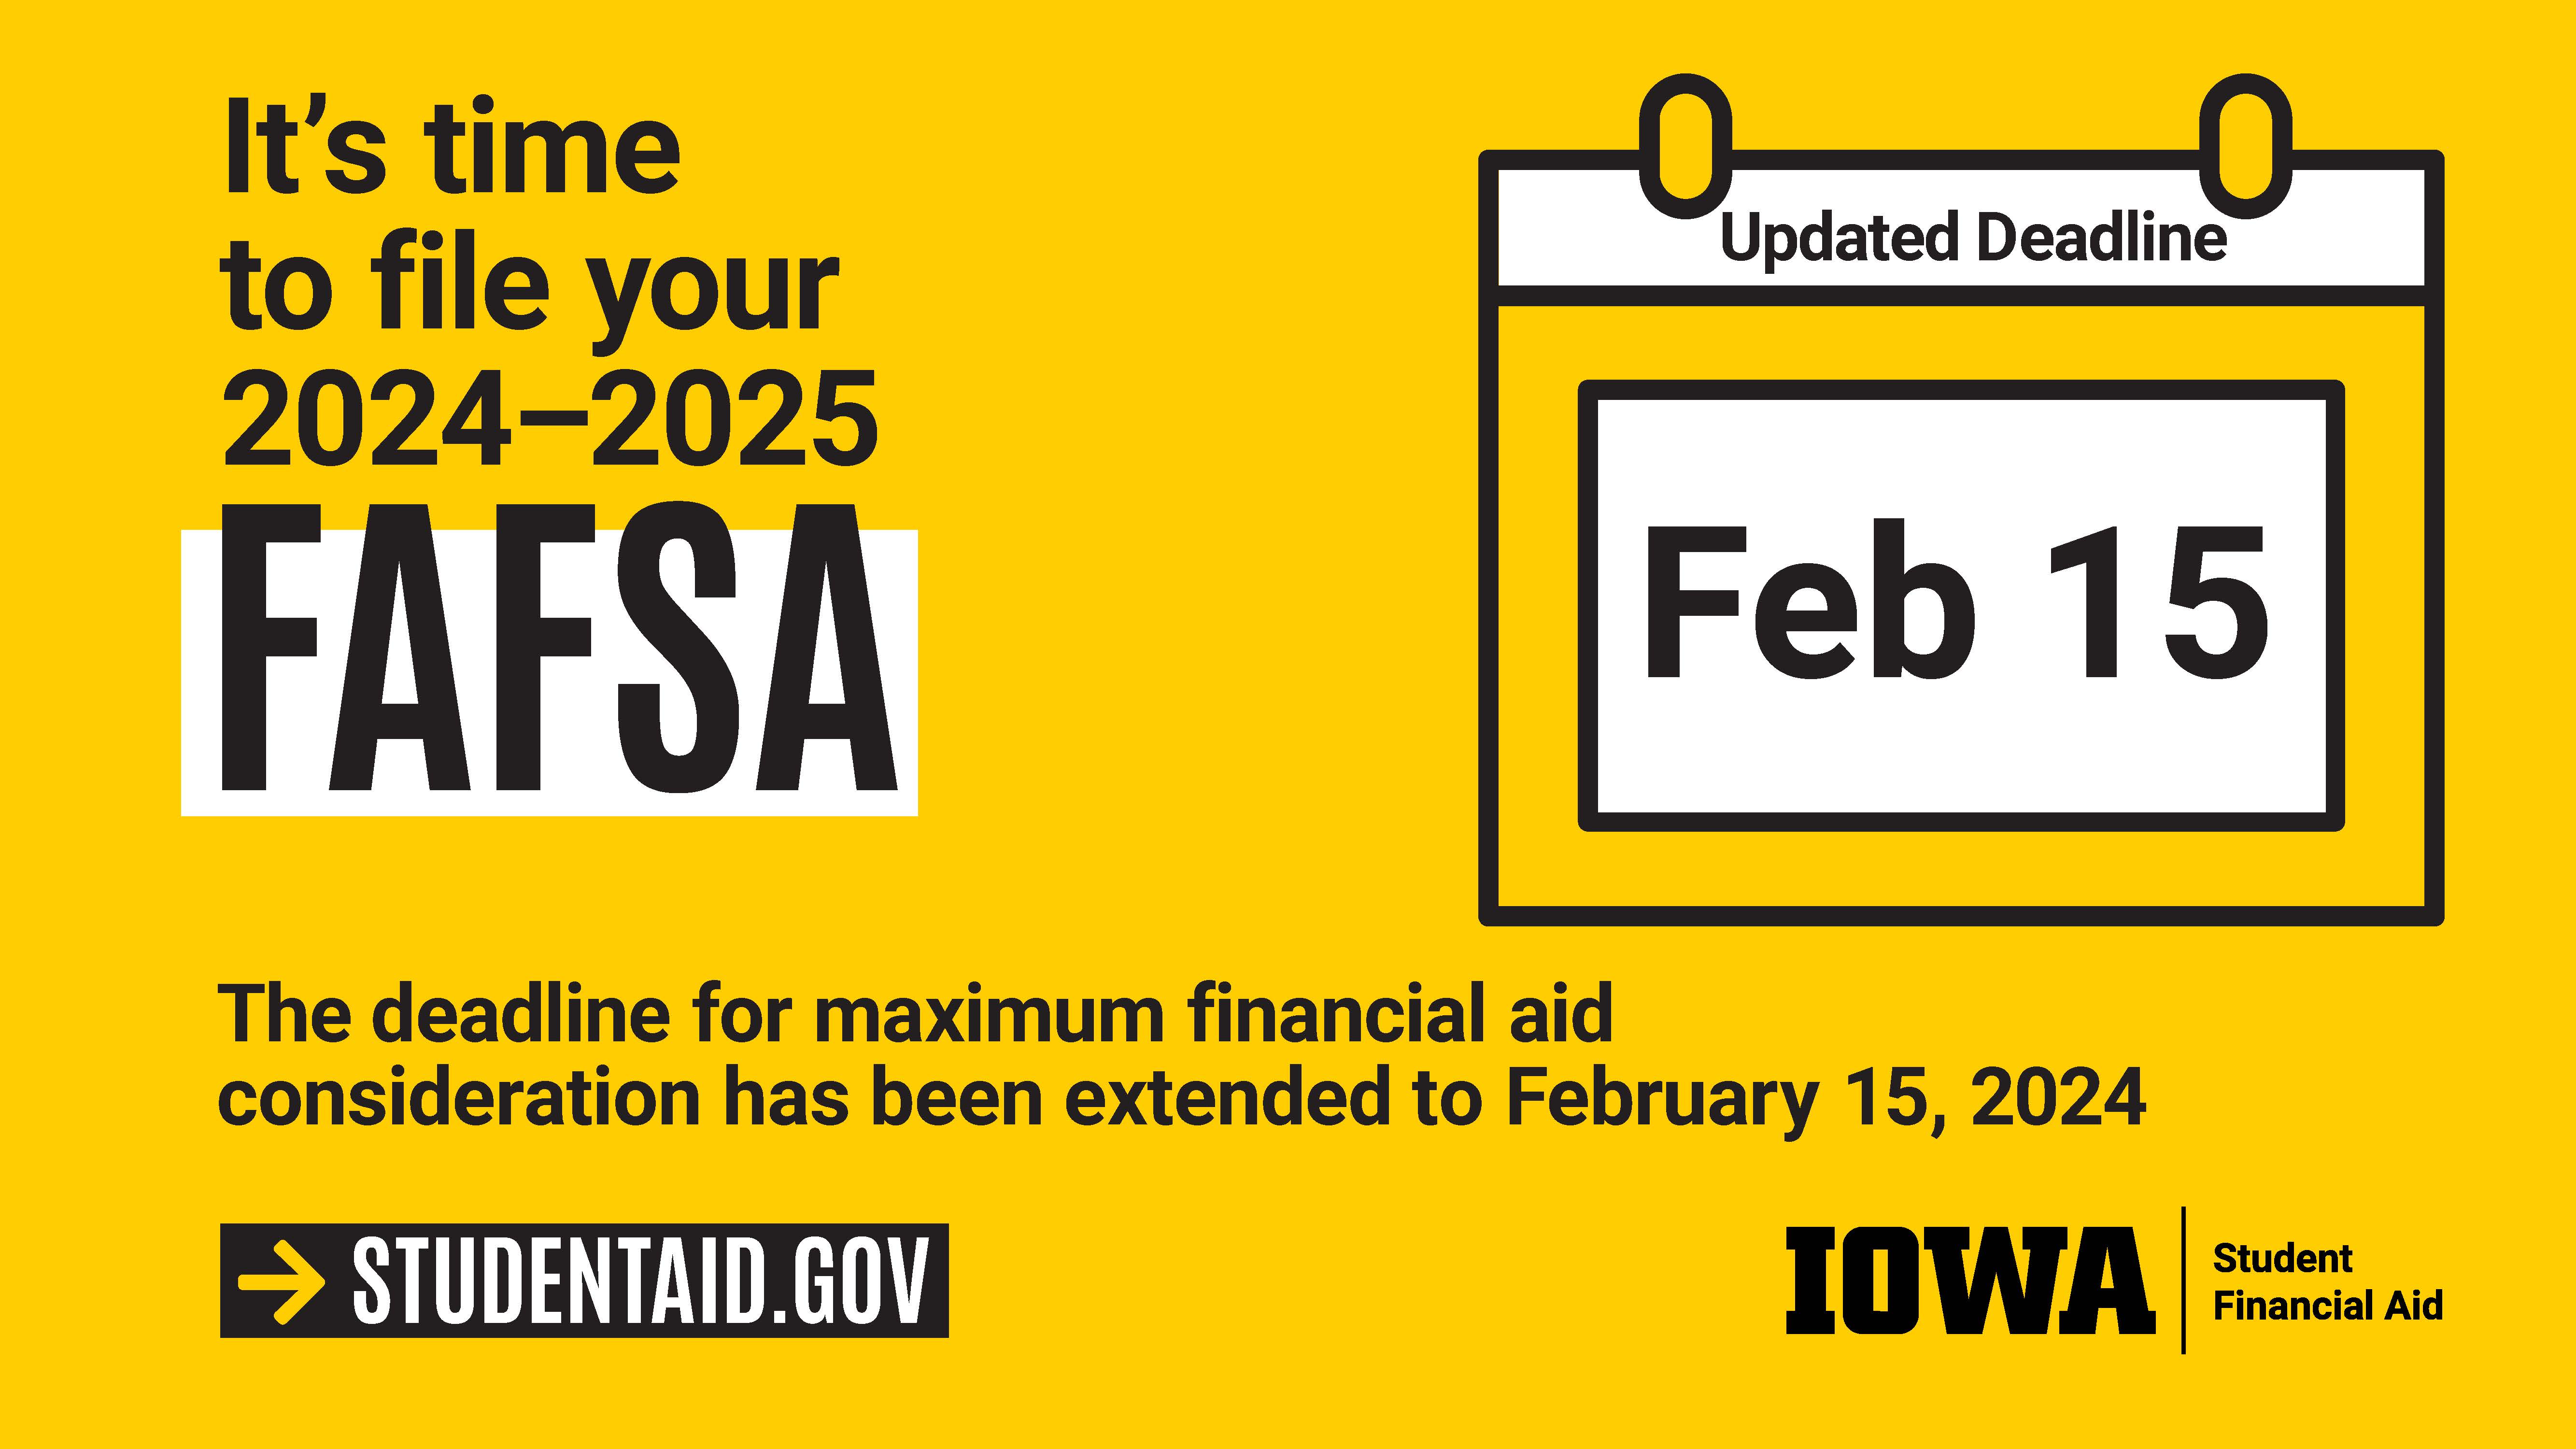 It's tiem to file your 2024-25 FAFSA. Deadline for maximum financial aid consideration is February 15, 2024.